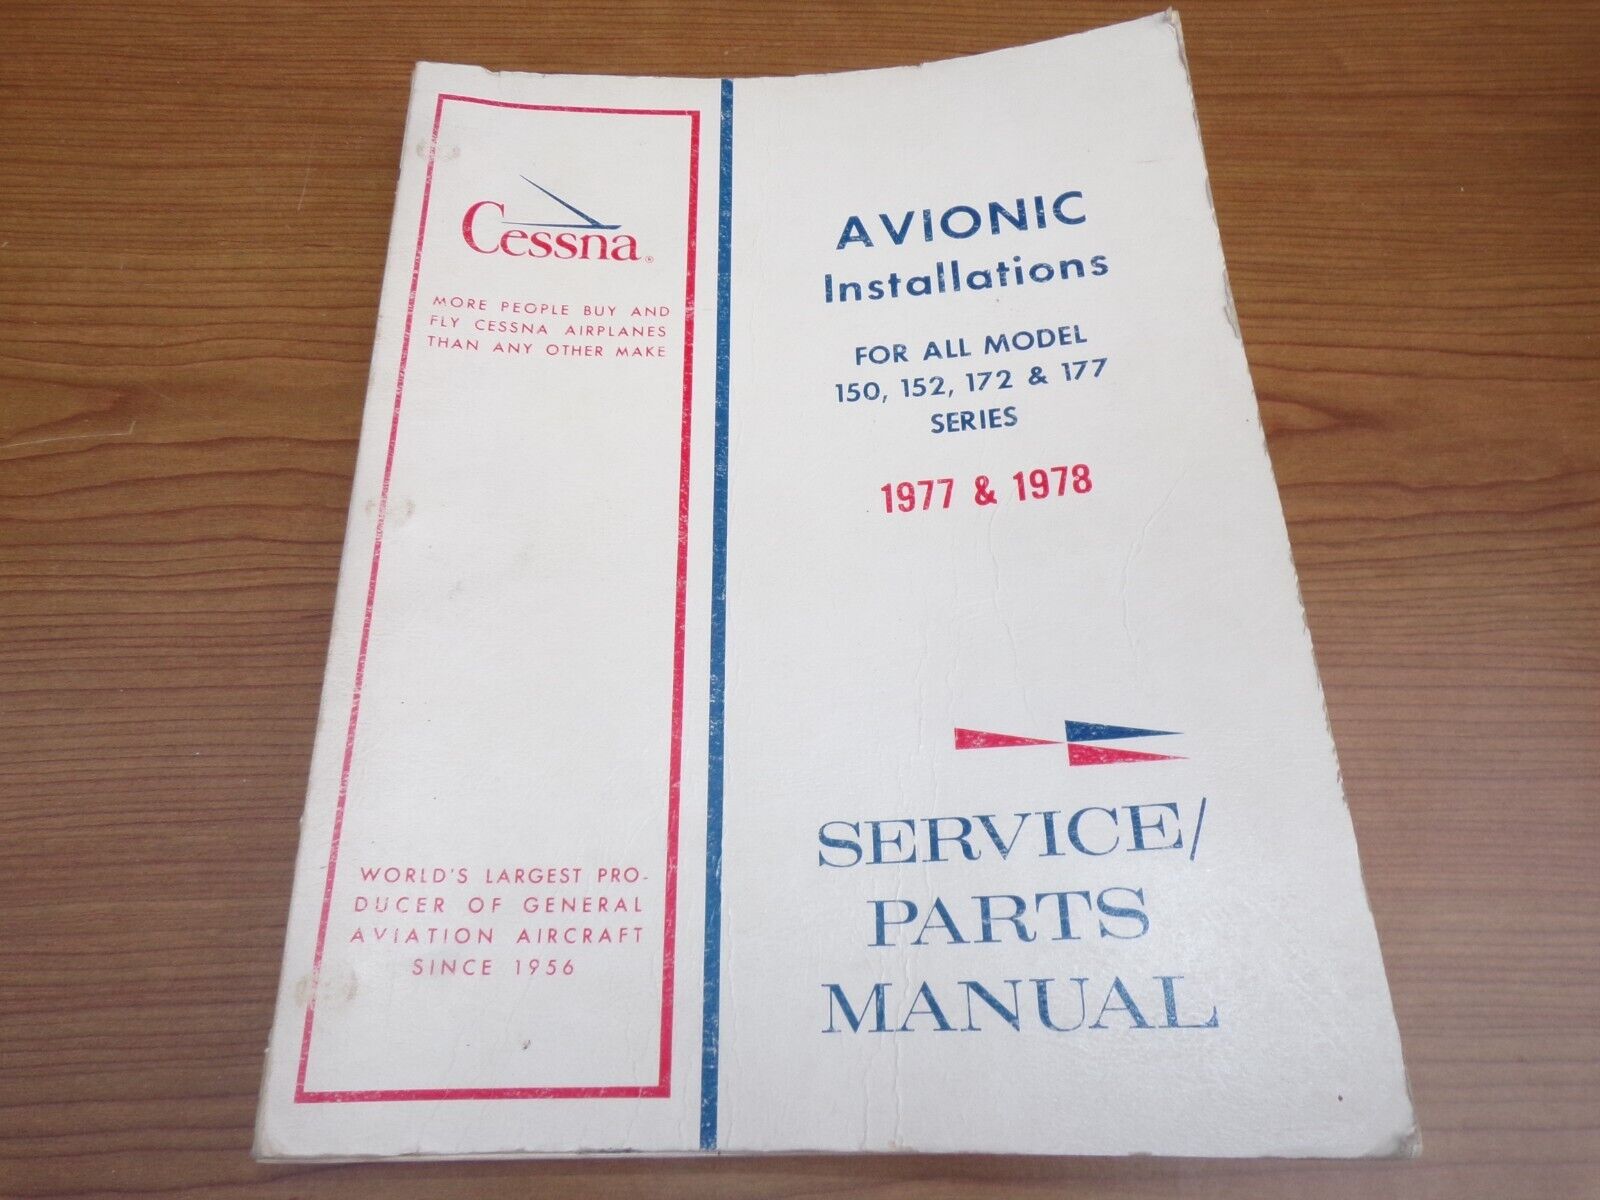 Cessna 150, 152, 172, 177 Series Avionics Service Parts Manual for 1977 and 1978